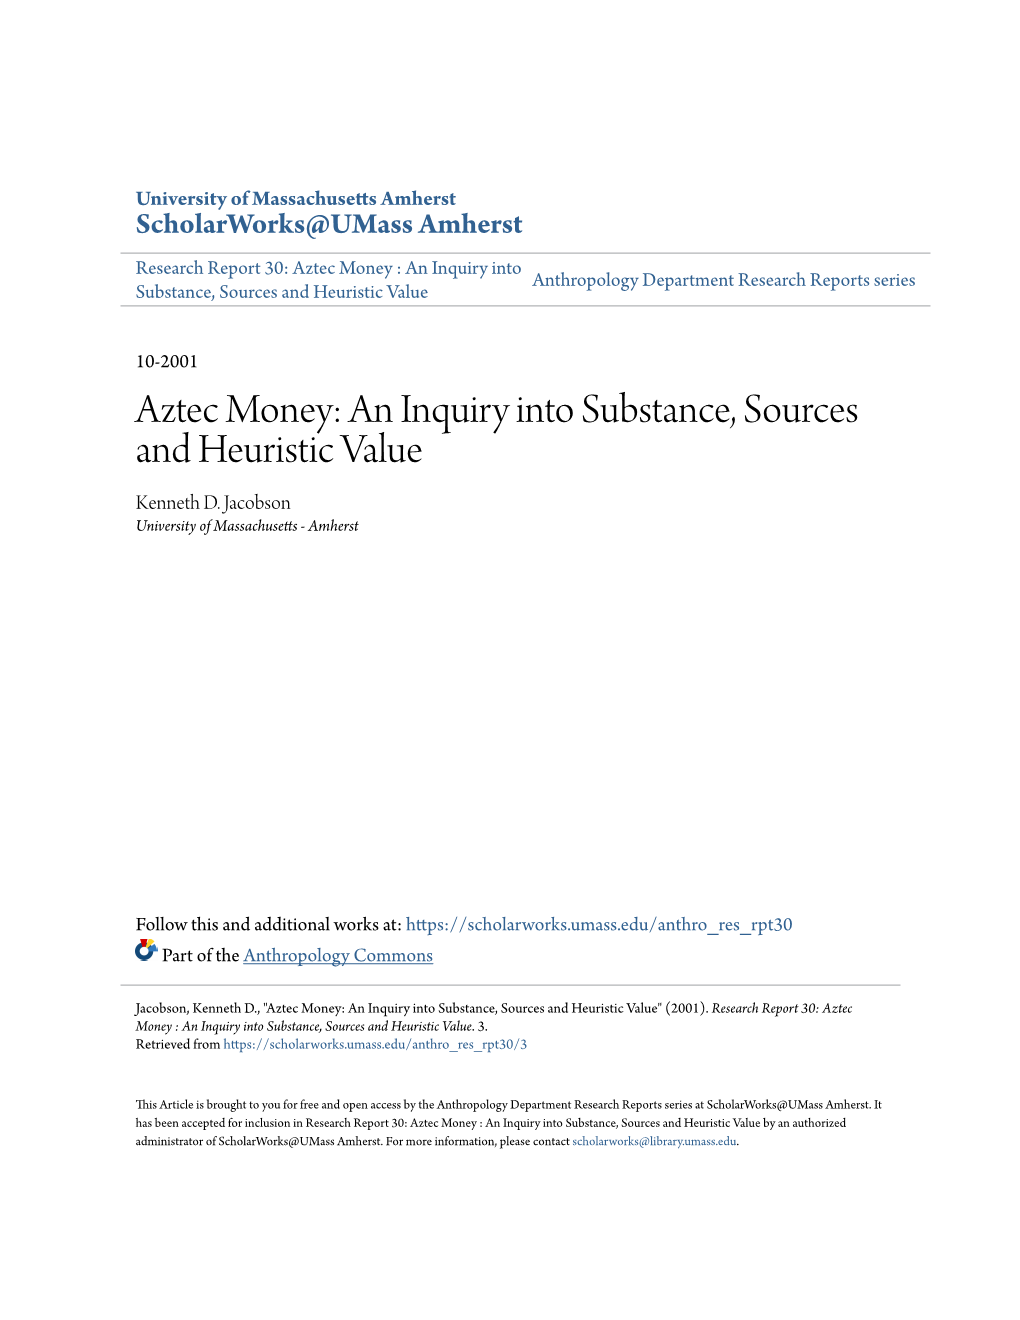 Aztec Money : an Inquiry Into Anthropology Department Research Reports Series Substance, Sources and Heuristic Value